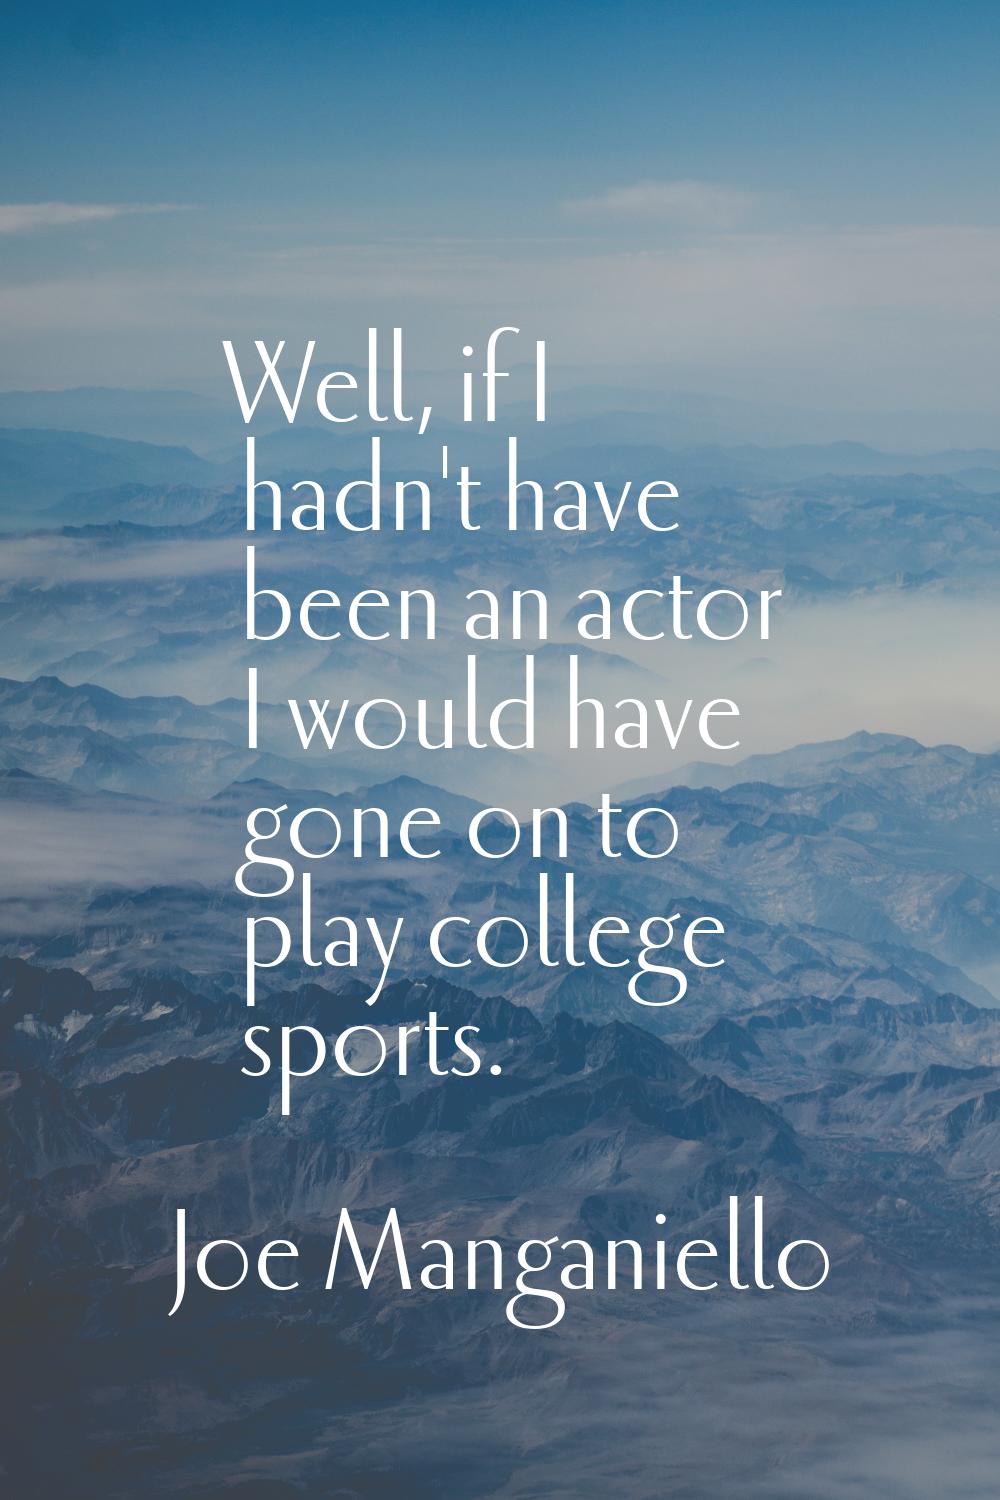 Well, if I hadn't have been an actor I would have gone on to play college sports.